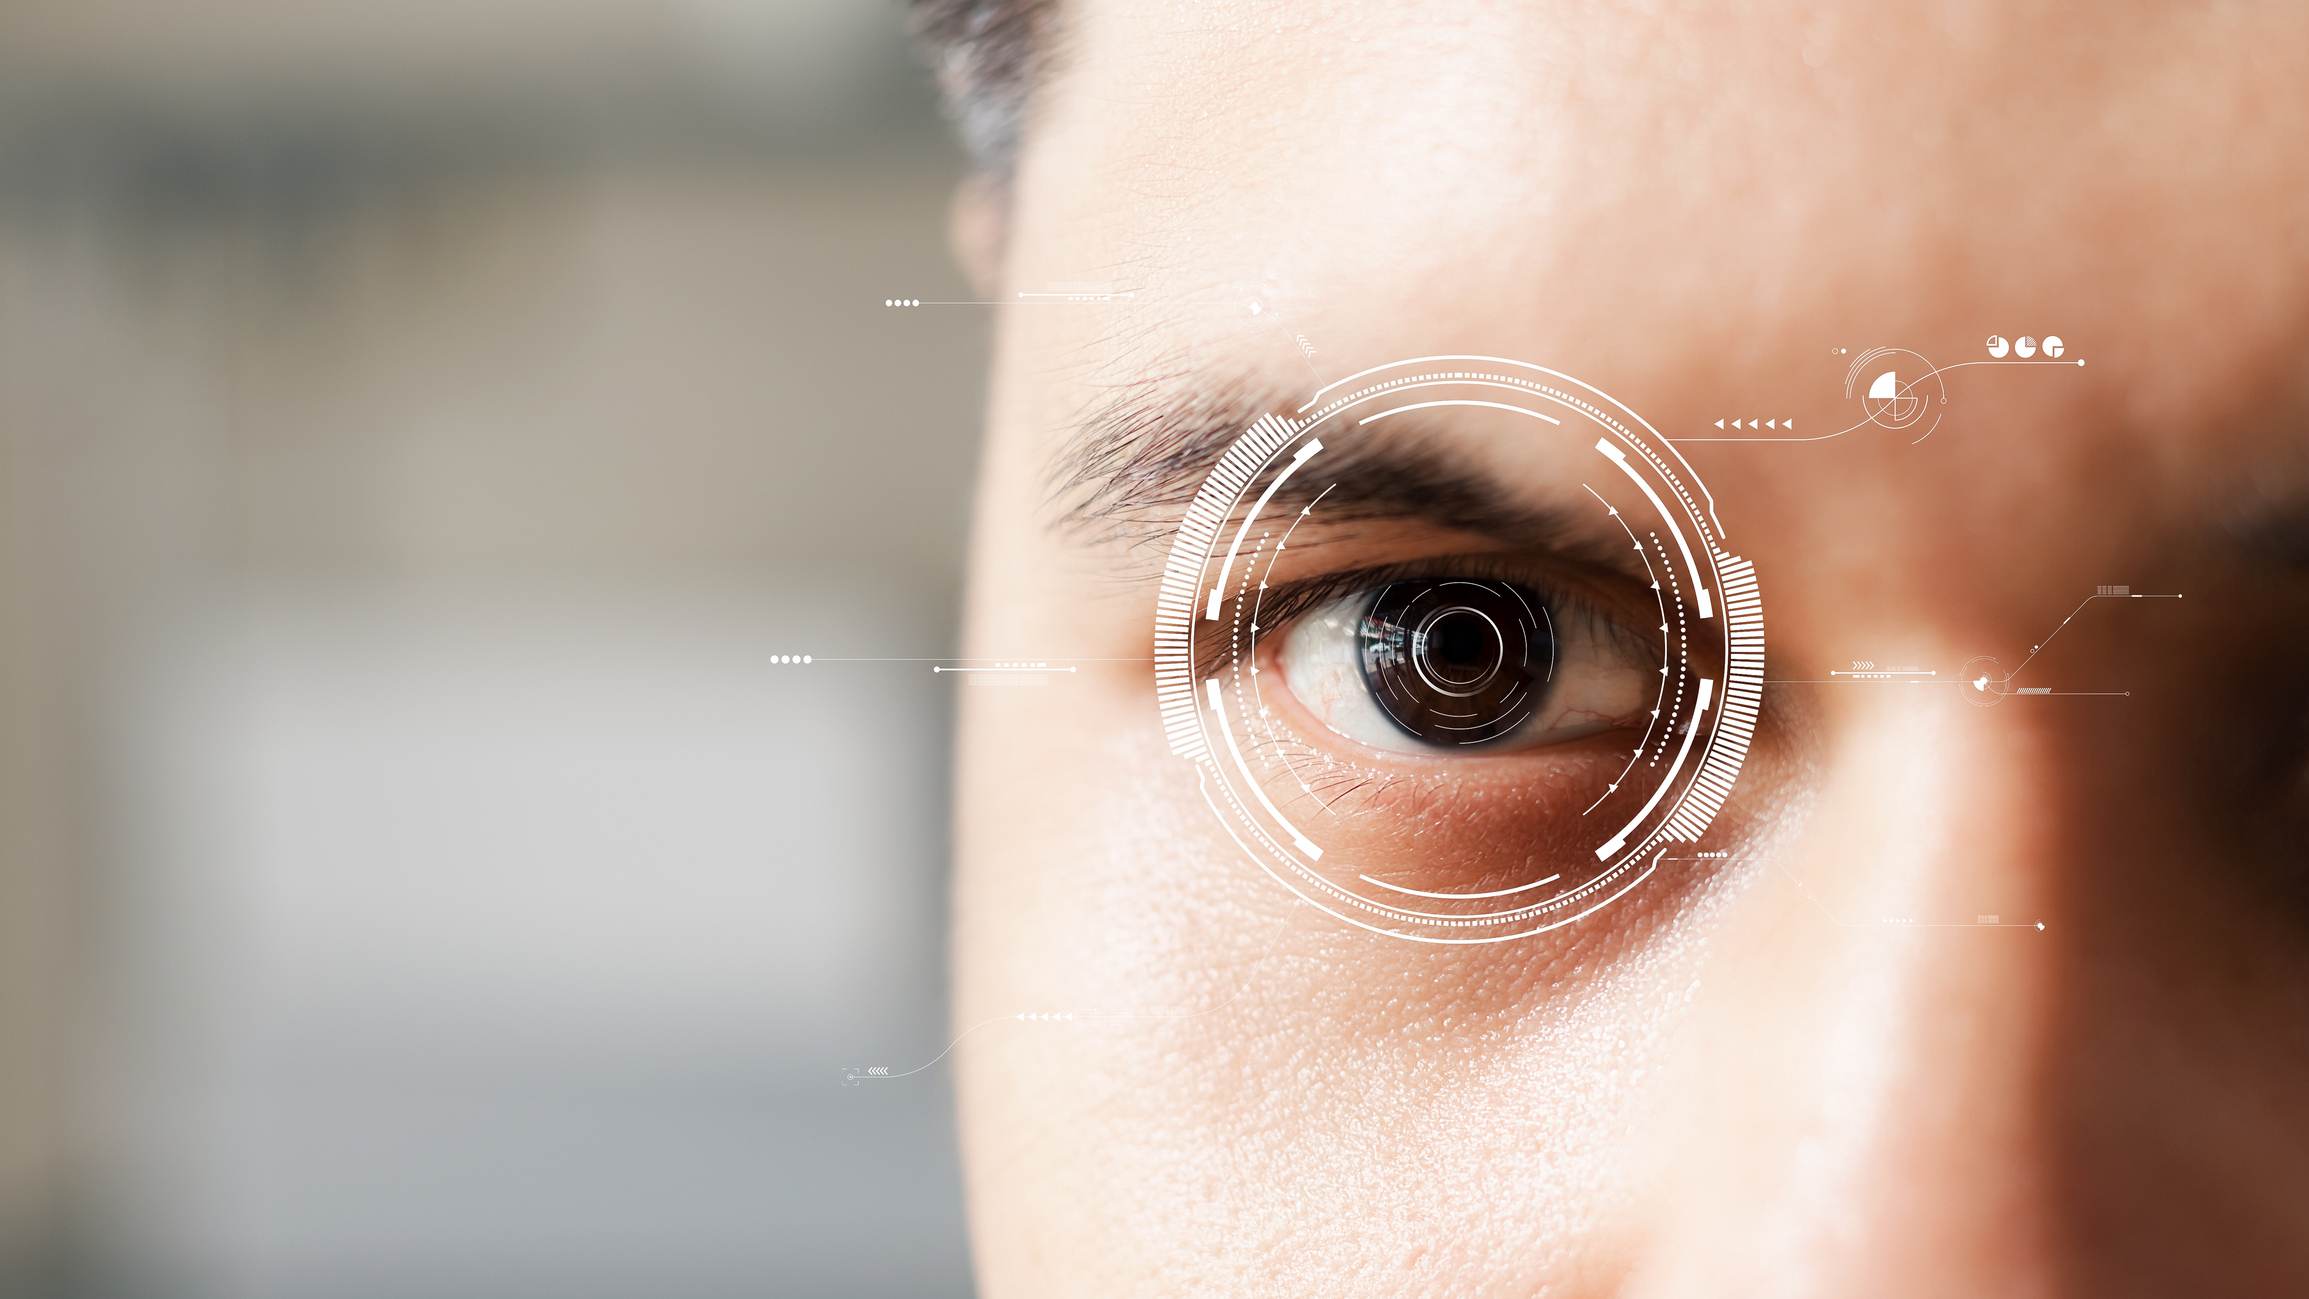 Biometric Eye Scanning for Identification and Security